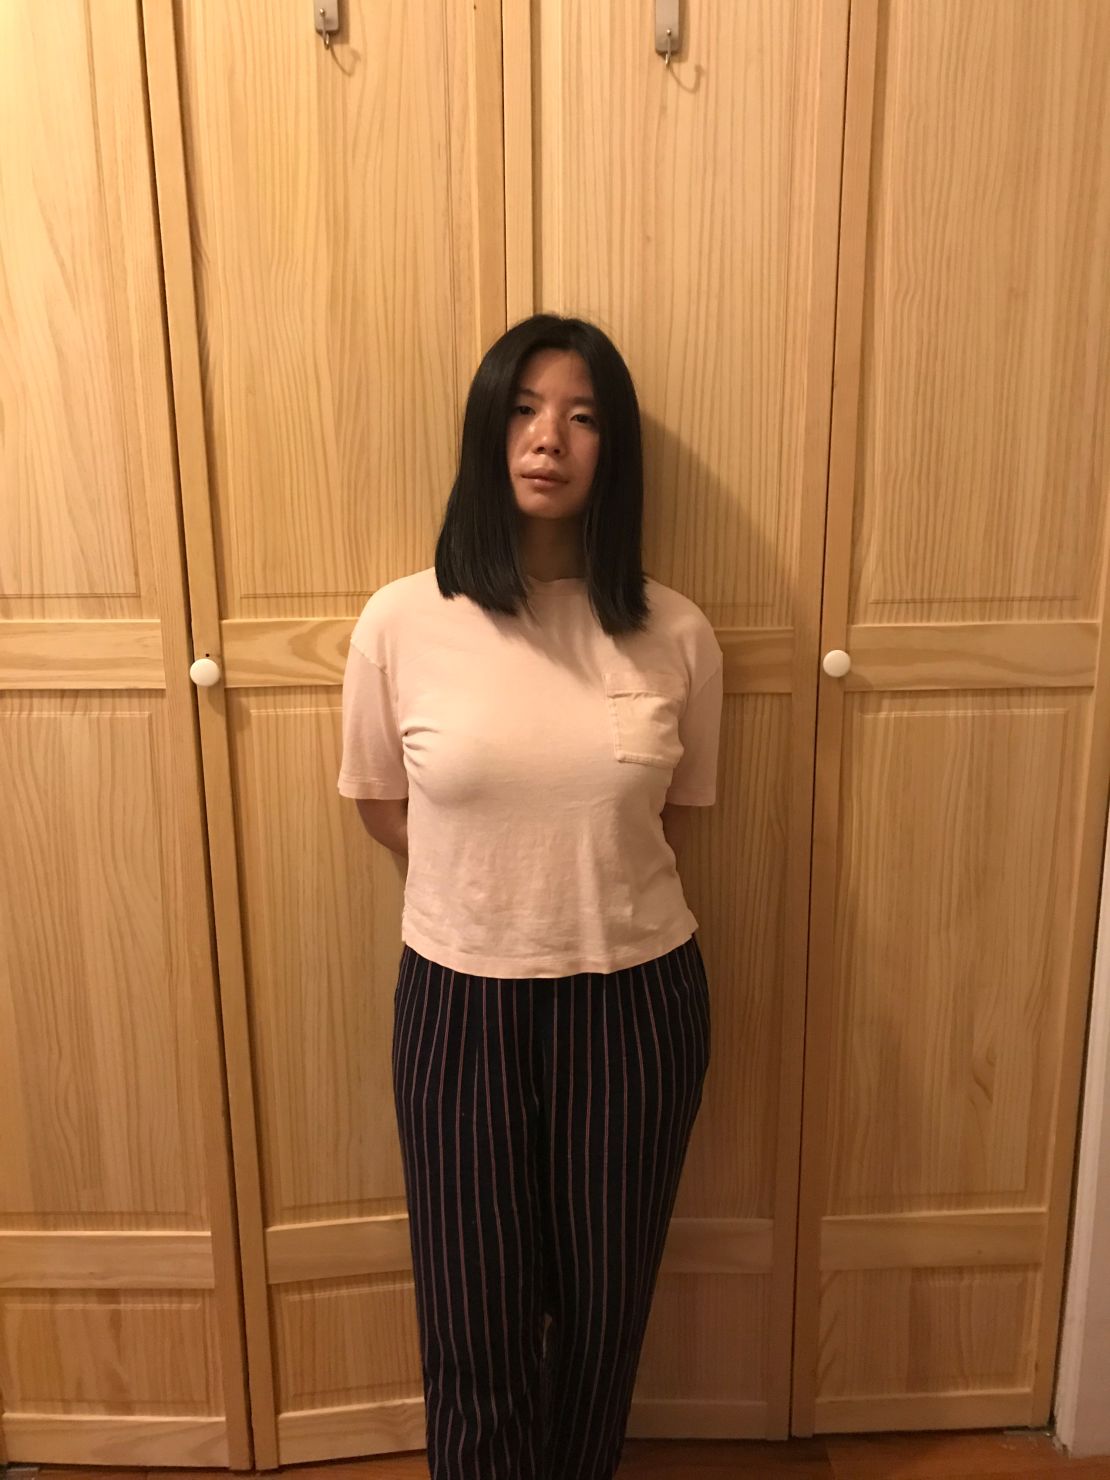 Lin Weng poses in her home in April. She applied for unemployment benefits after being furloughed from her job at a coffee shop. (Lin Weng)